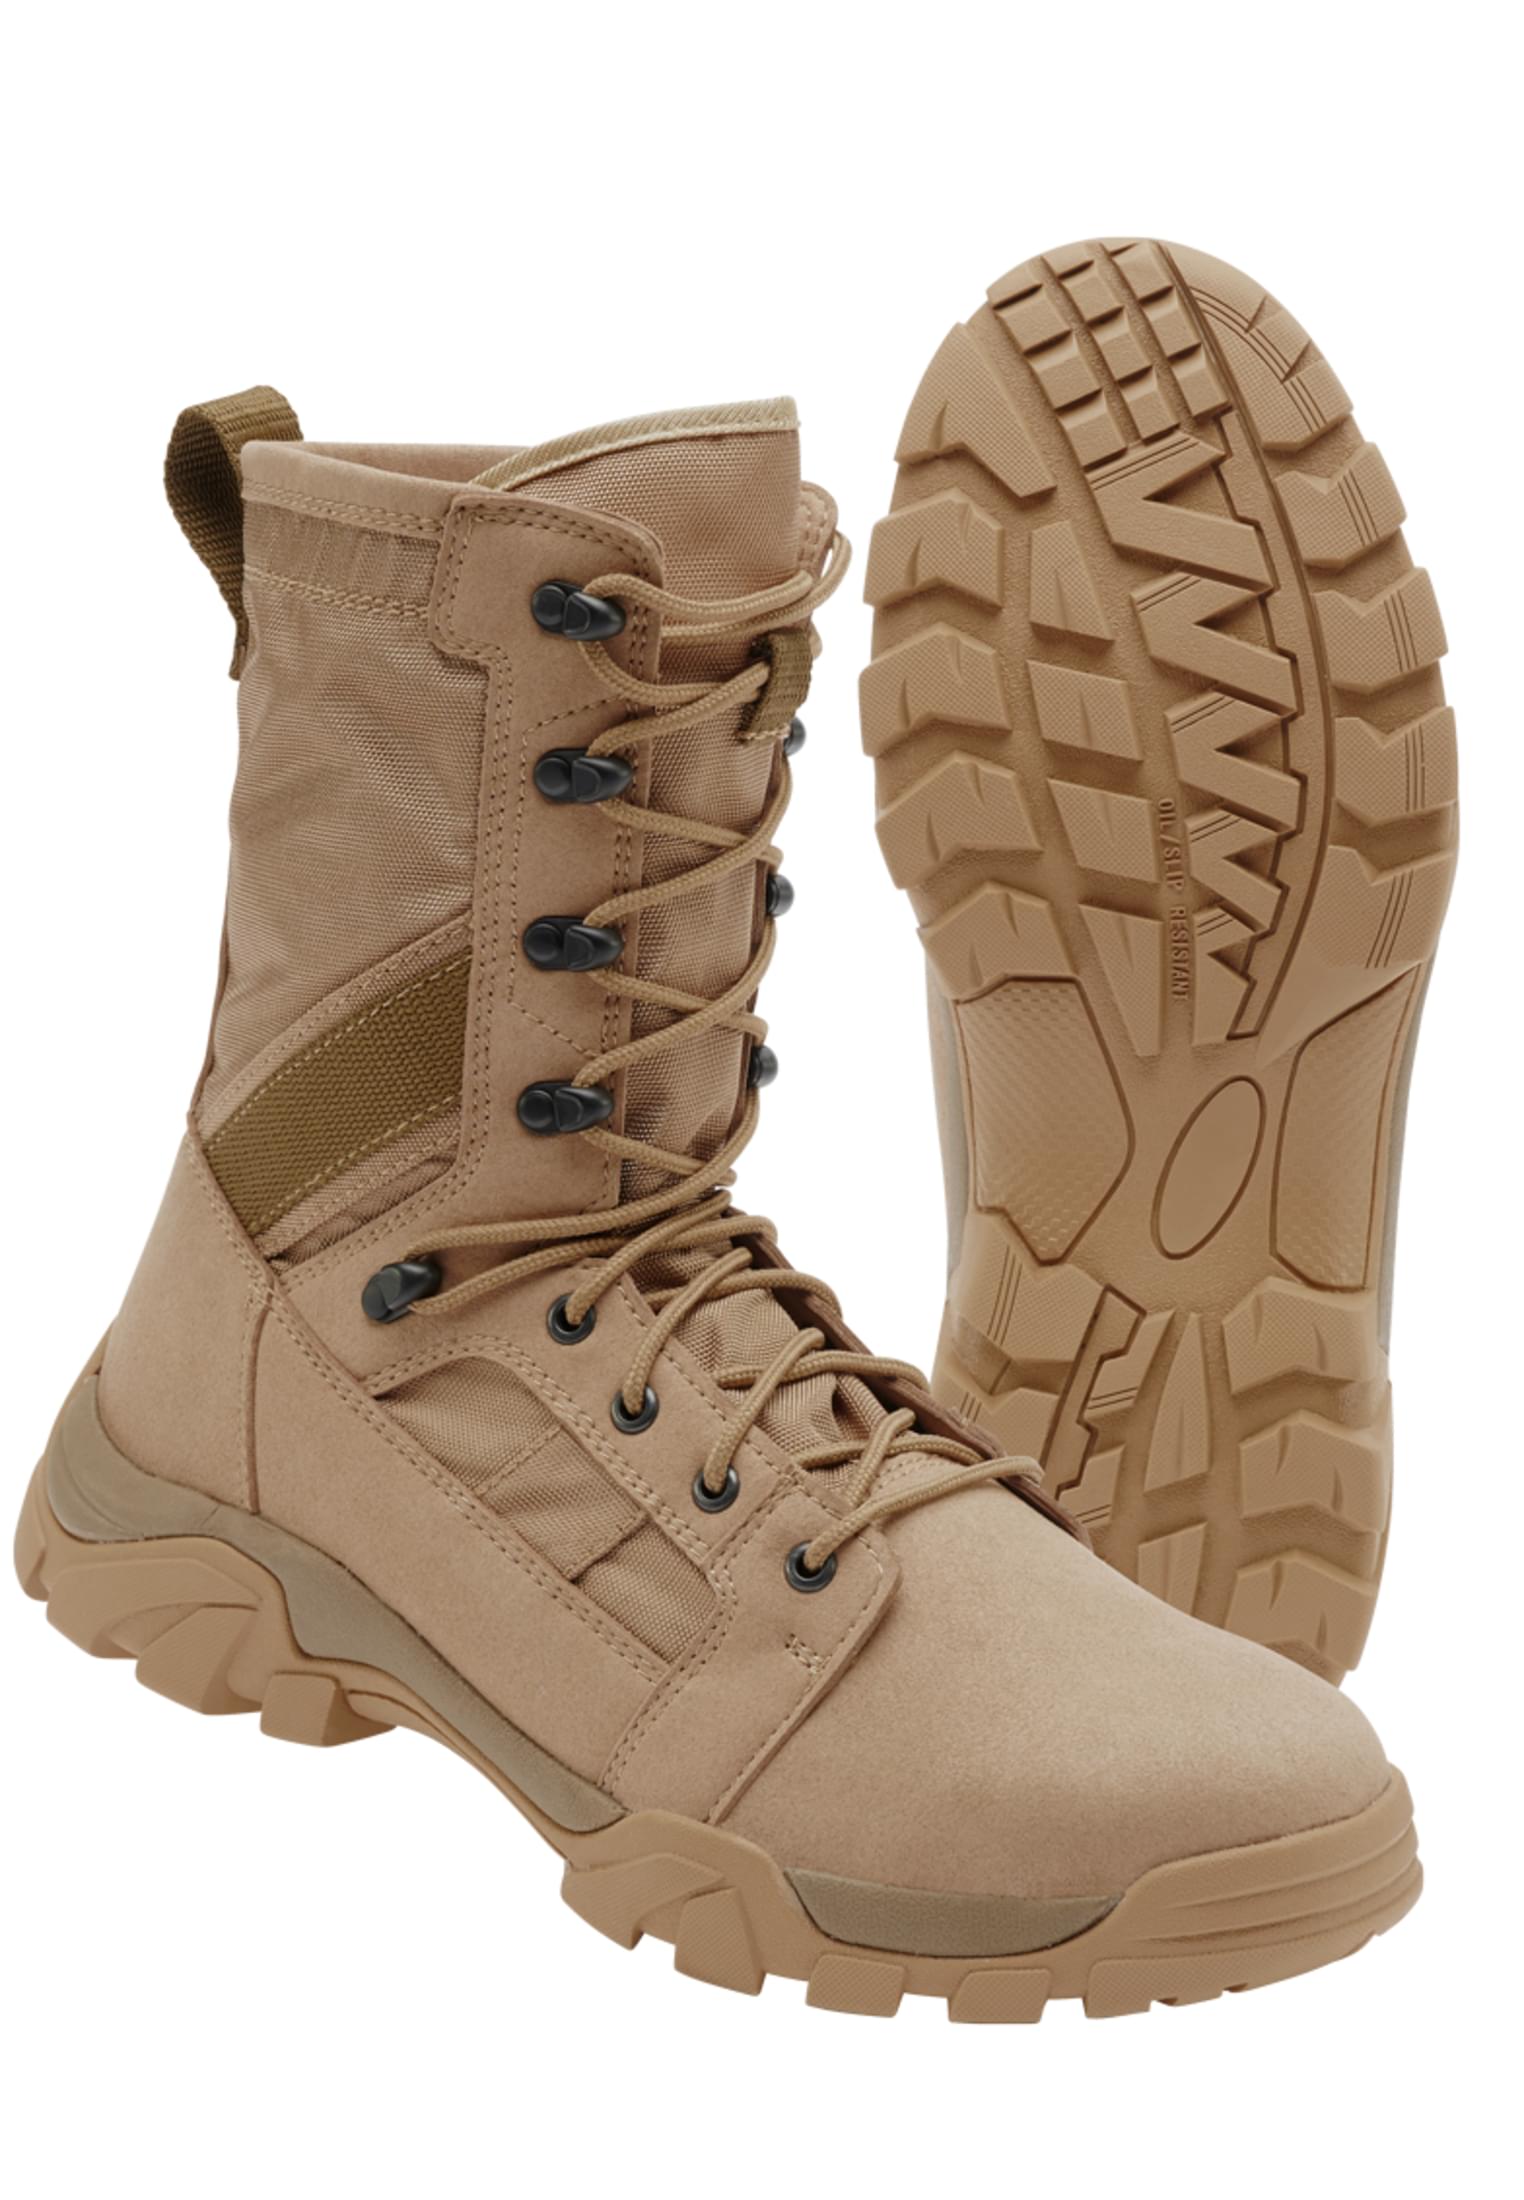 Schuhe Defense Boot in Farbe camel